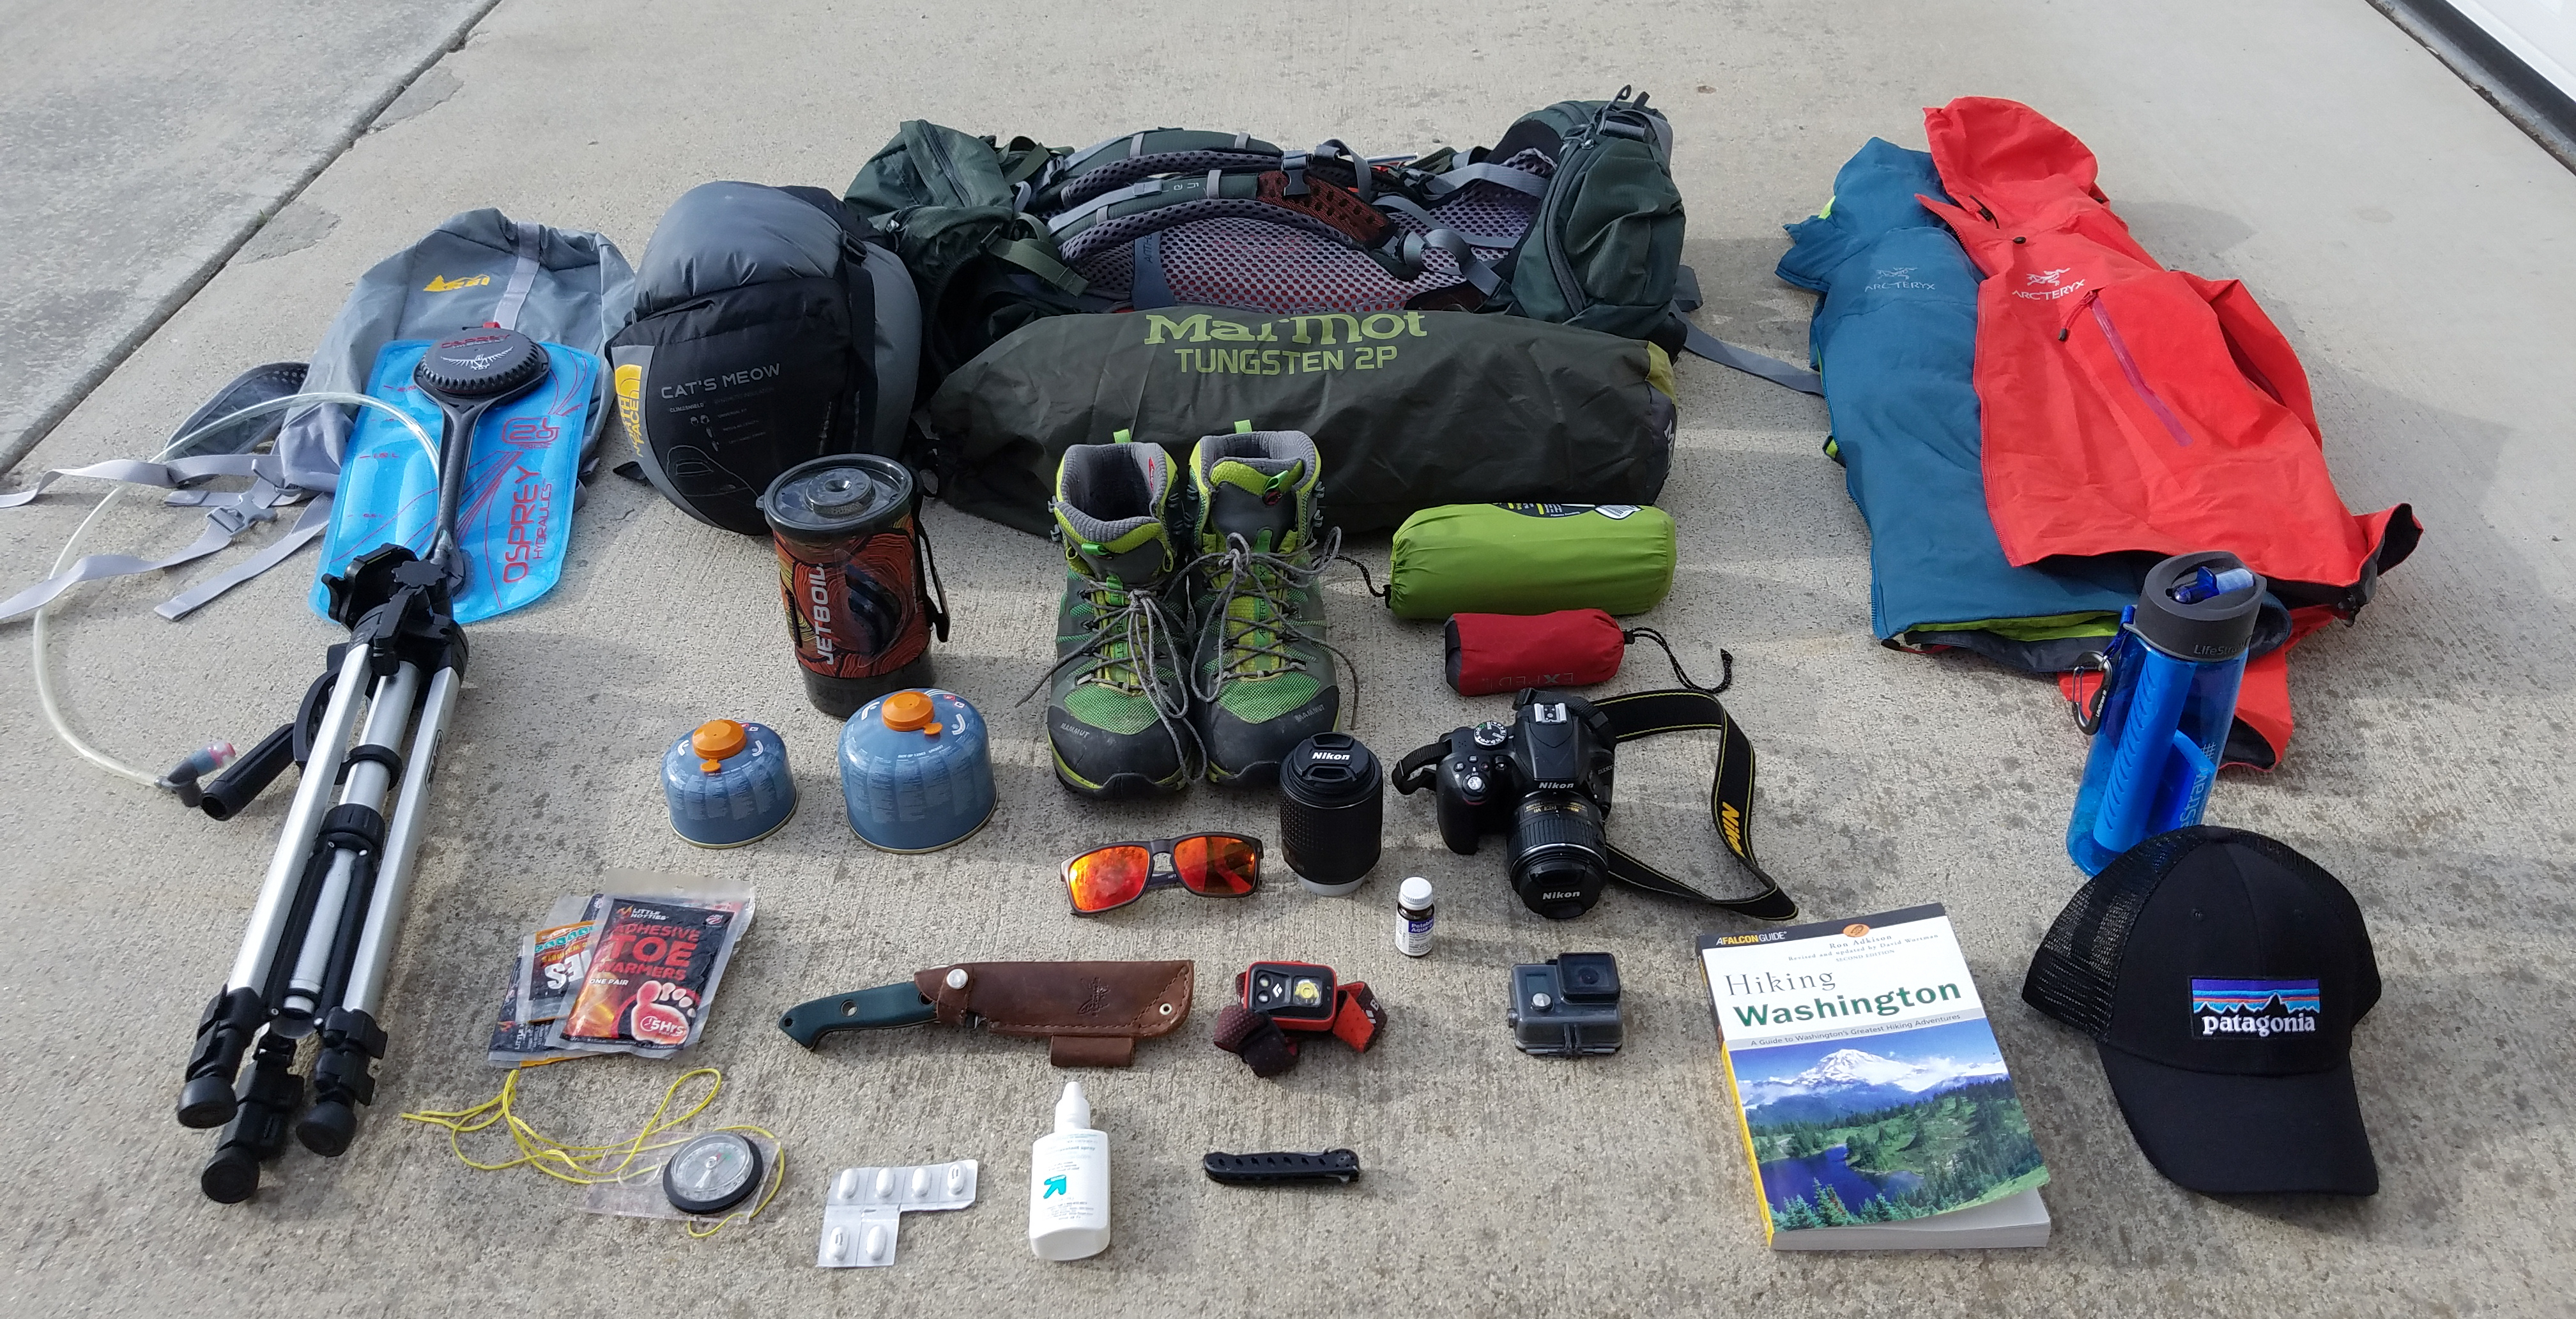  backcountry camping gear